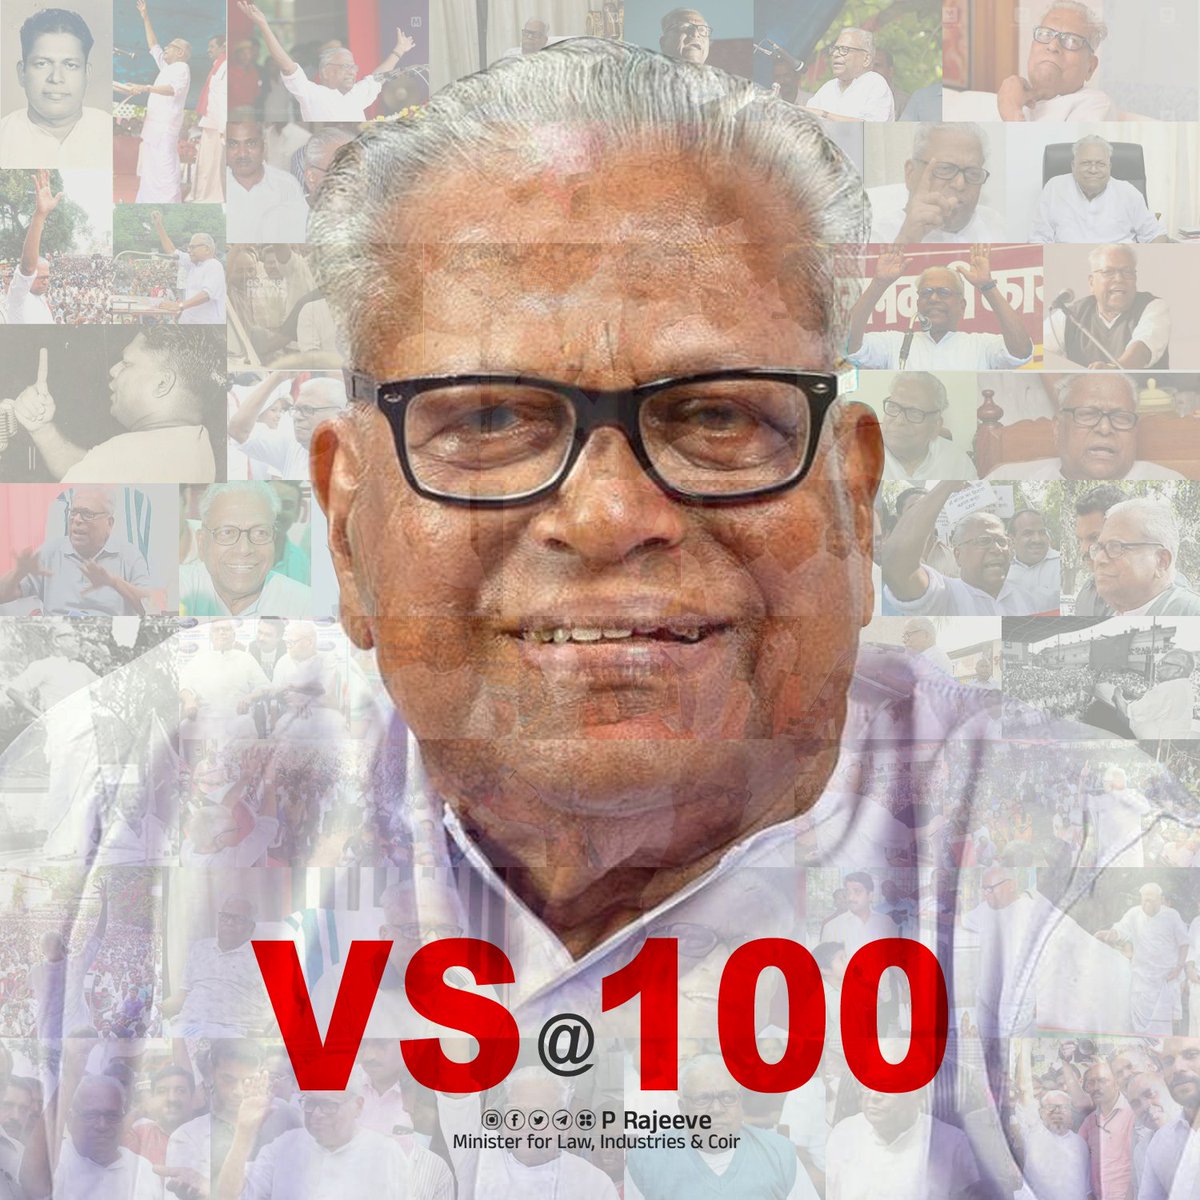 Celebrating the 100th birthday of Comrade VS Achuthanandan, communist stalwart and a pillar of Kerala's history. His unwavering commitment to the cause of independence, workers' rights, and social justice has made an indelible impact on the course of struggles for a better world.